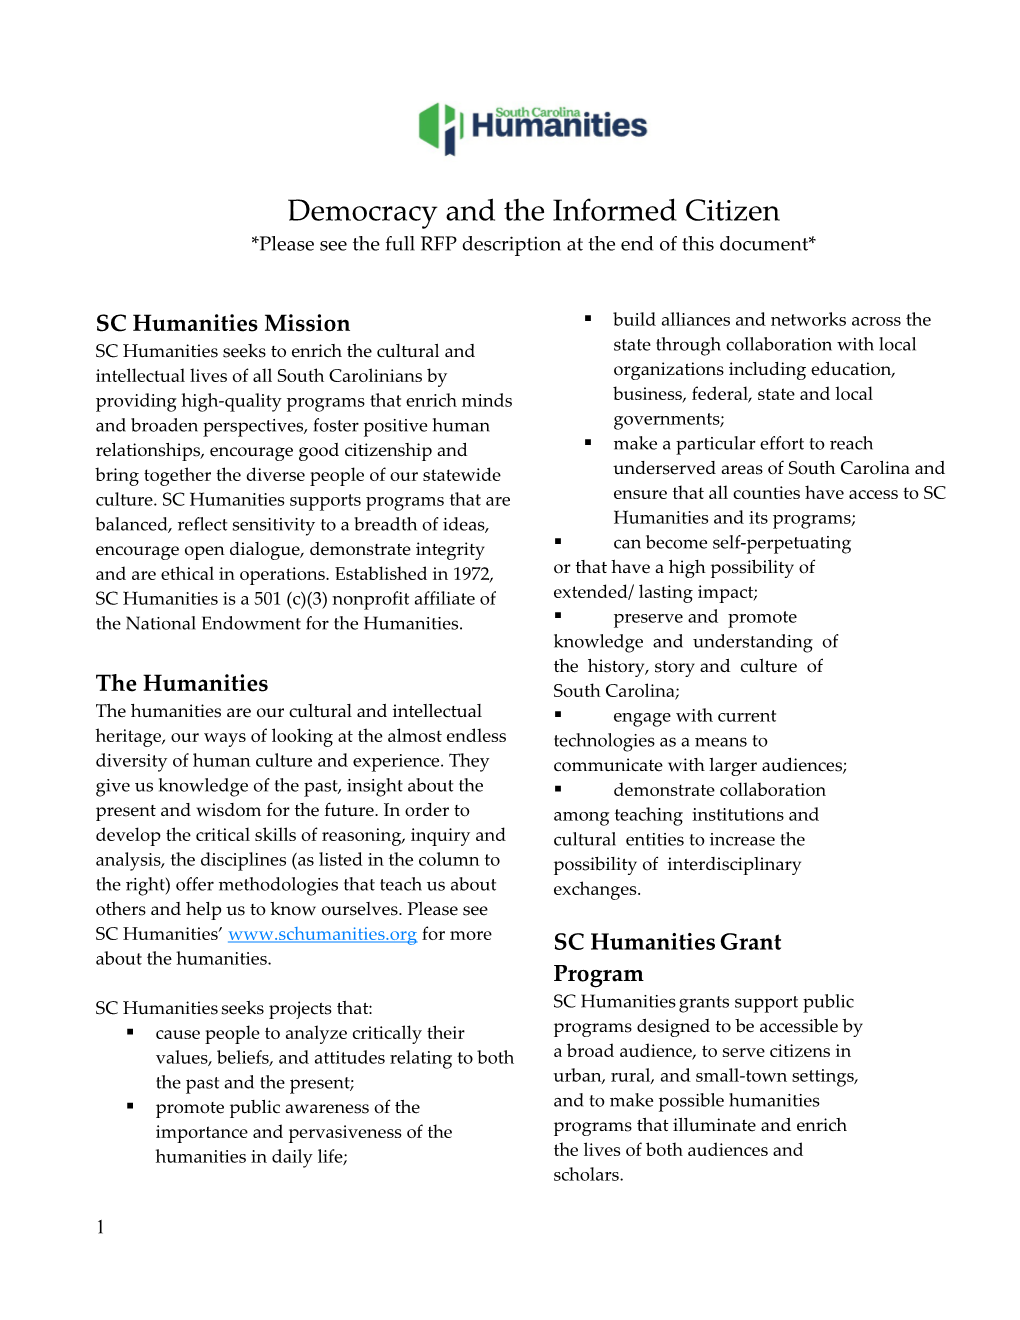 Democracy and the Informed Citizen